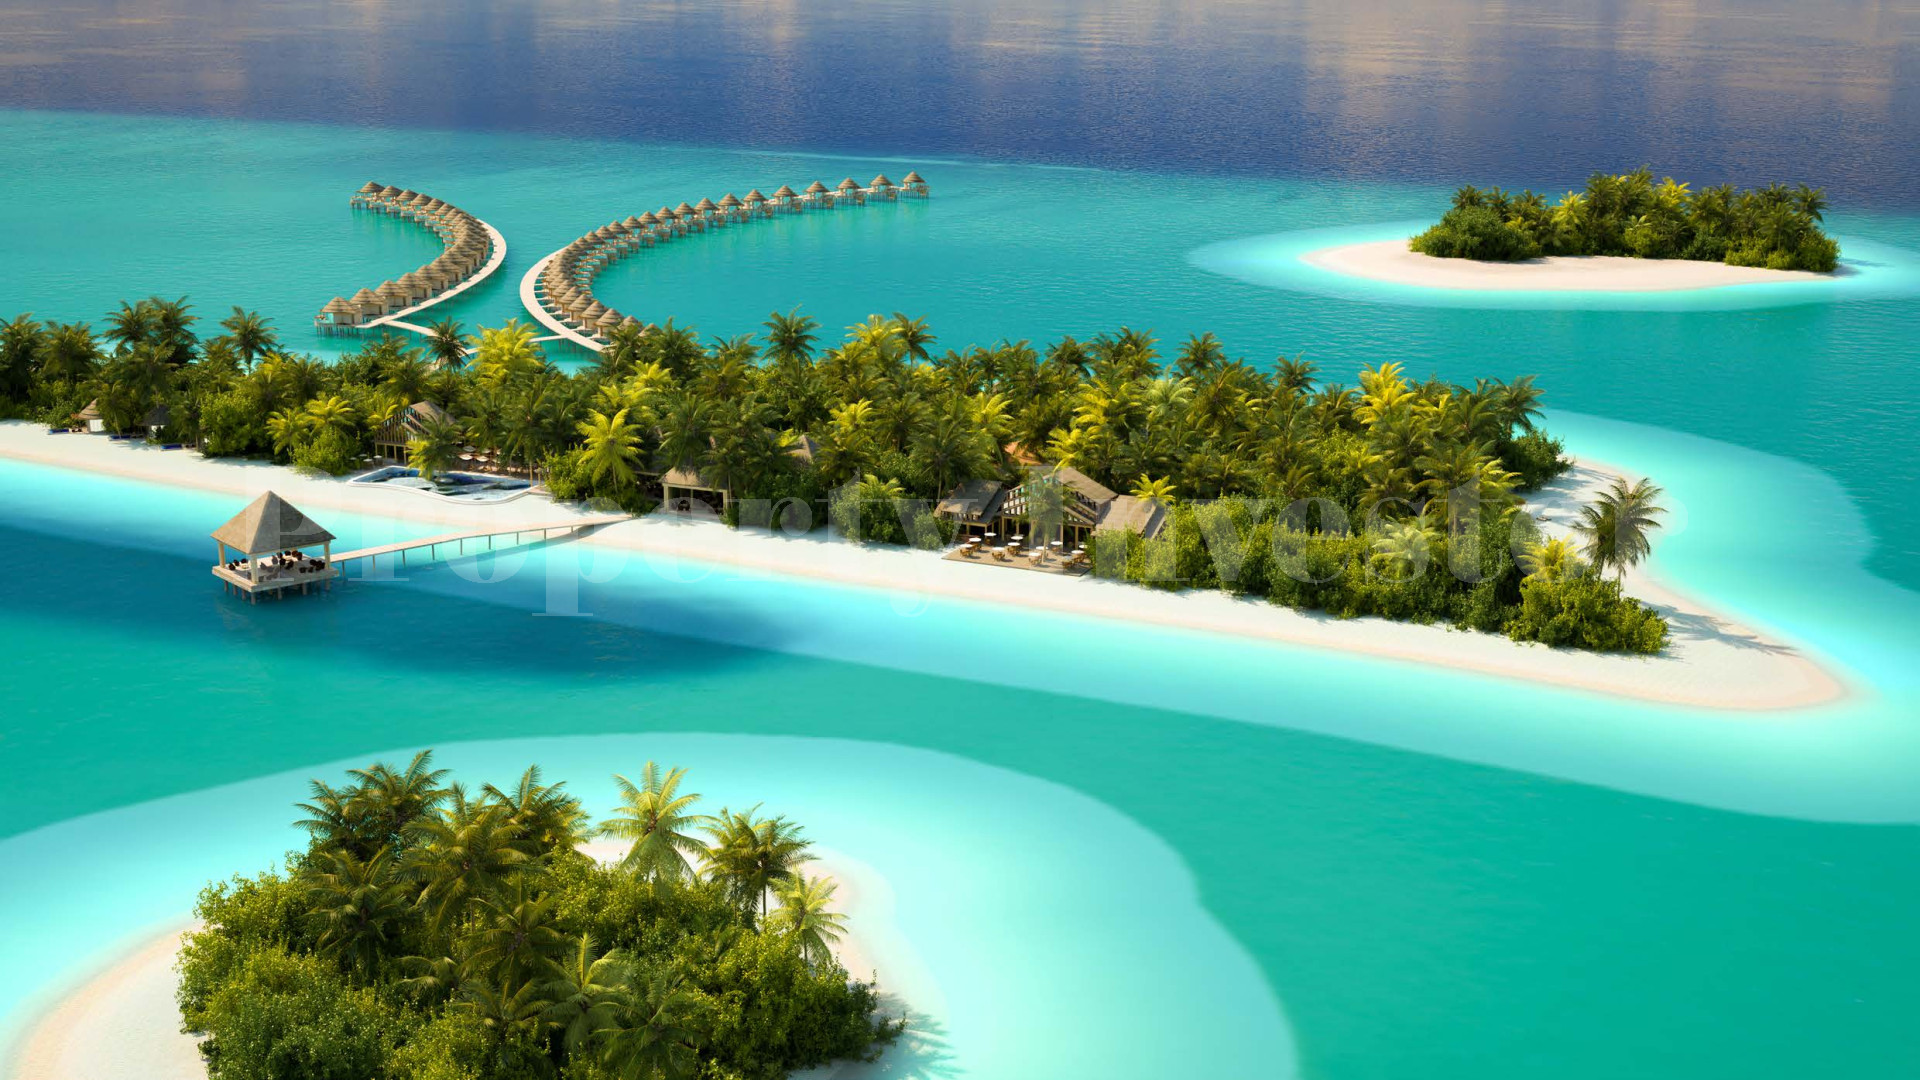 Operational 4* Star Eco Island Resort with Ready 174 Room Redevelopment/Expansion Plan for Sale in the Maldives